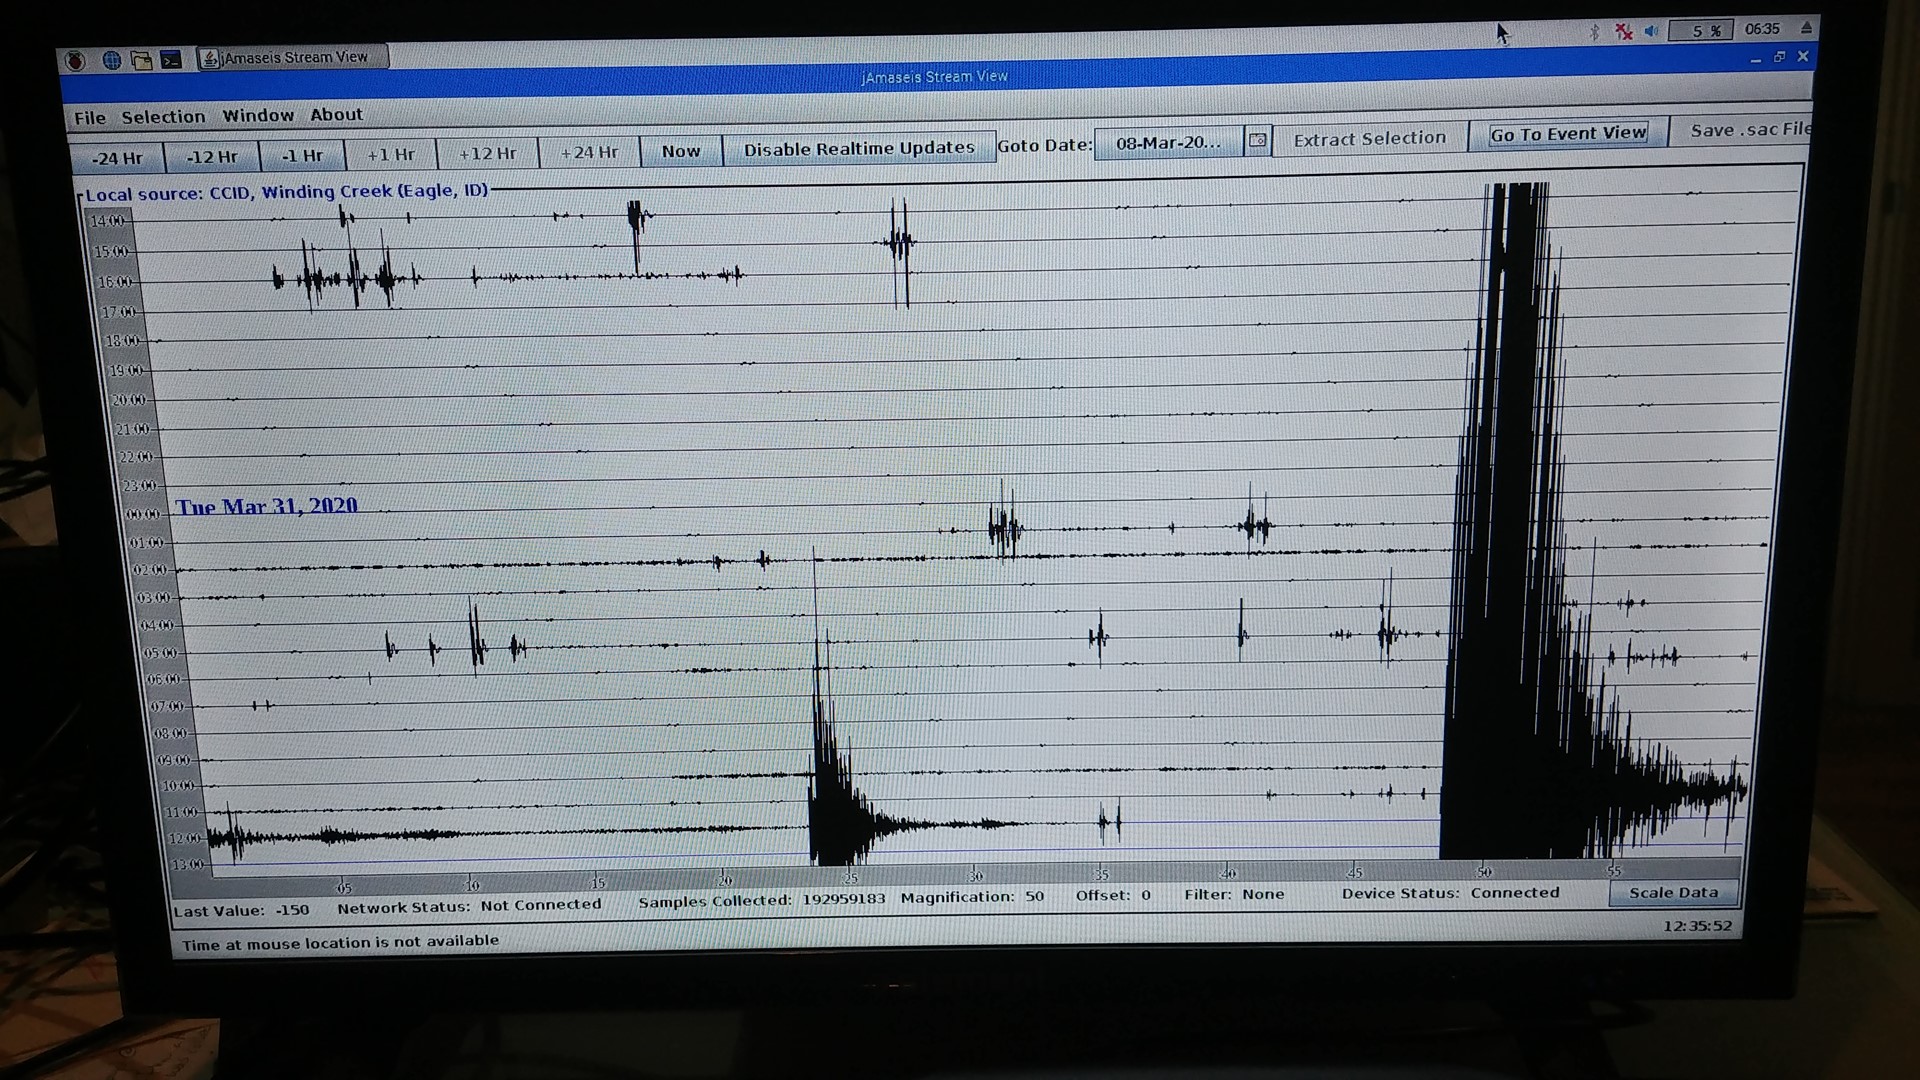 The quake was centered about 75 miles north east of Boise Idaho, and hit just before 5 p.m. yesterday.